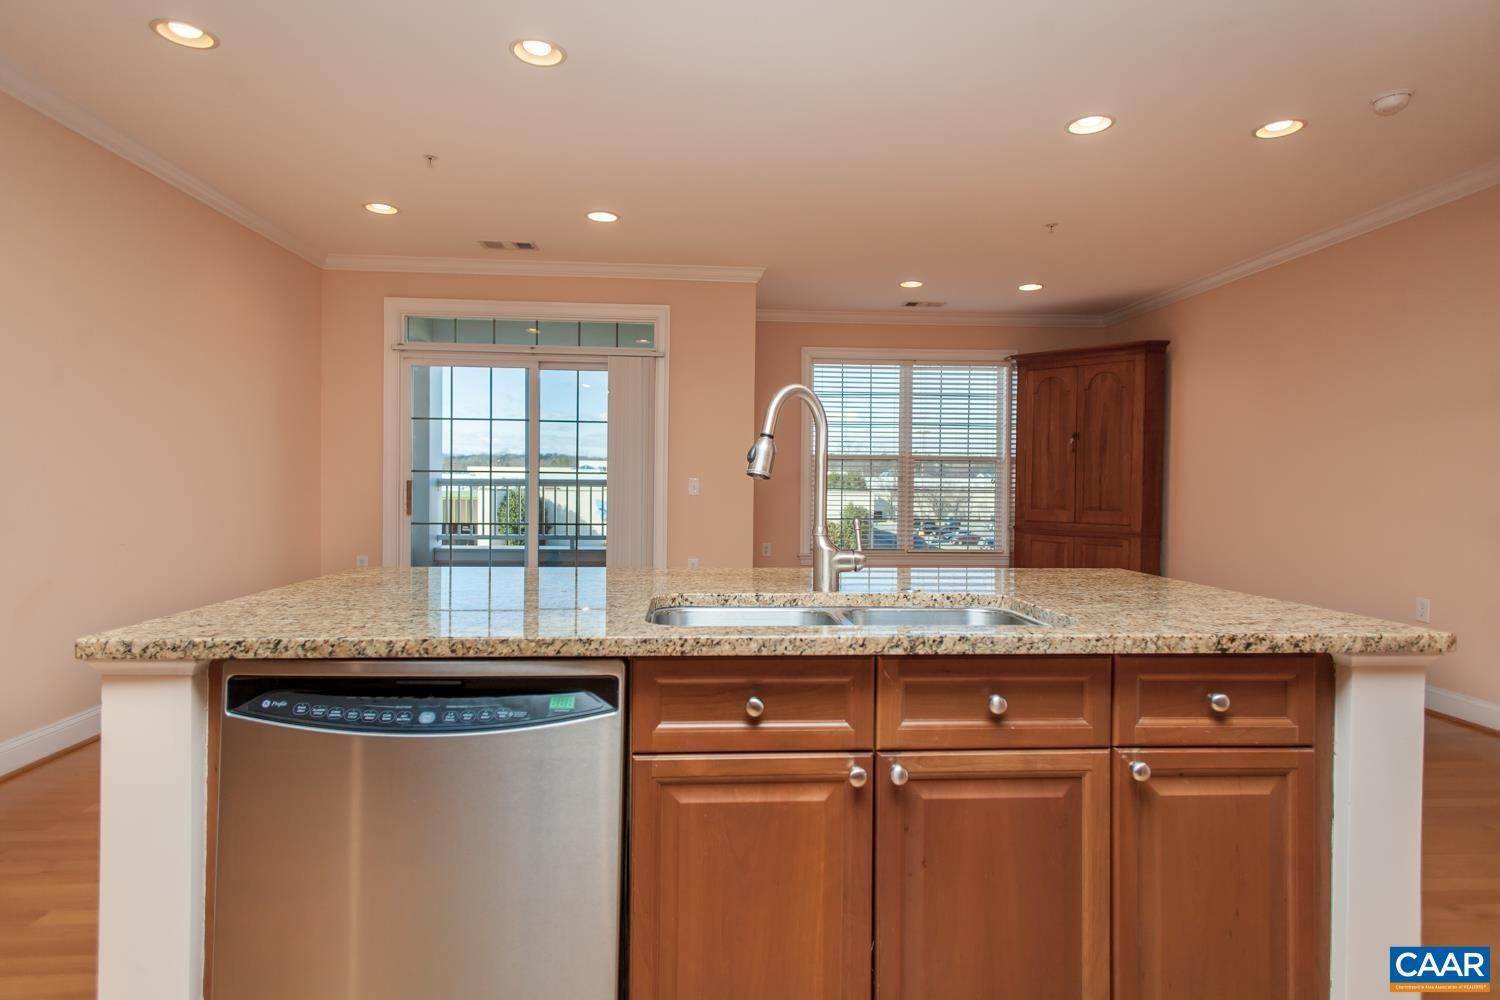 11. Condominiums for Sale at 1051 GLENWOOD STATION LN #304 Charlottesville, Virginia 22901 United States